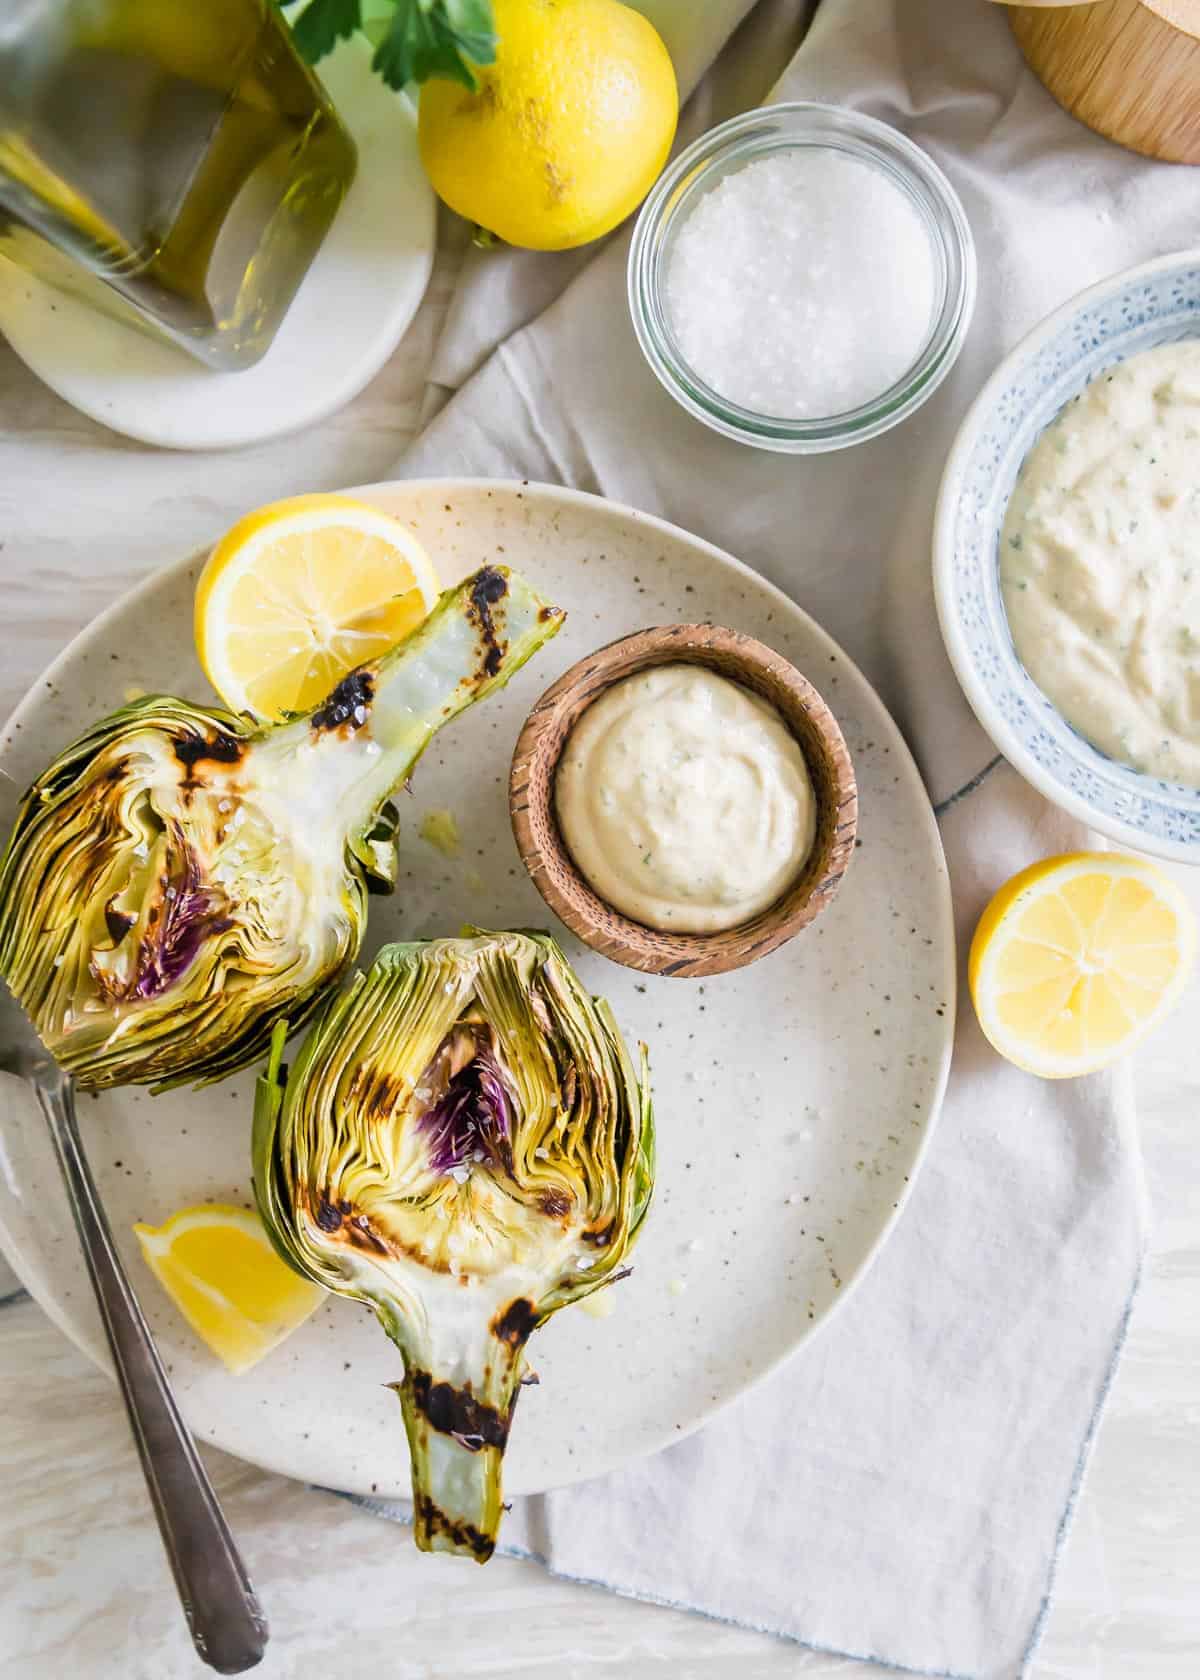 Looking for a new way to enjoy eating artichokes? Try grilling them with this simple recipe! The smoky grilled charred flavor goes perfectly with a bright tahini lemon dipping sauce.